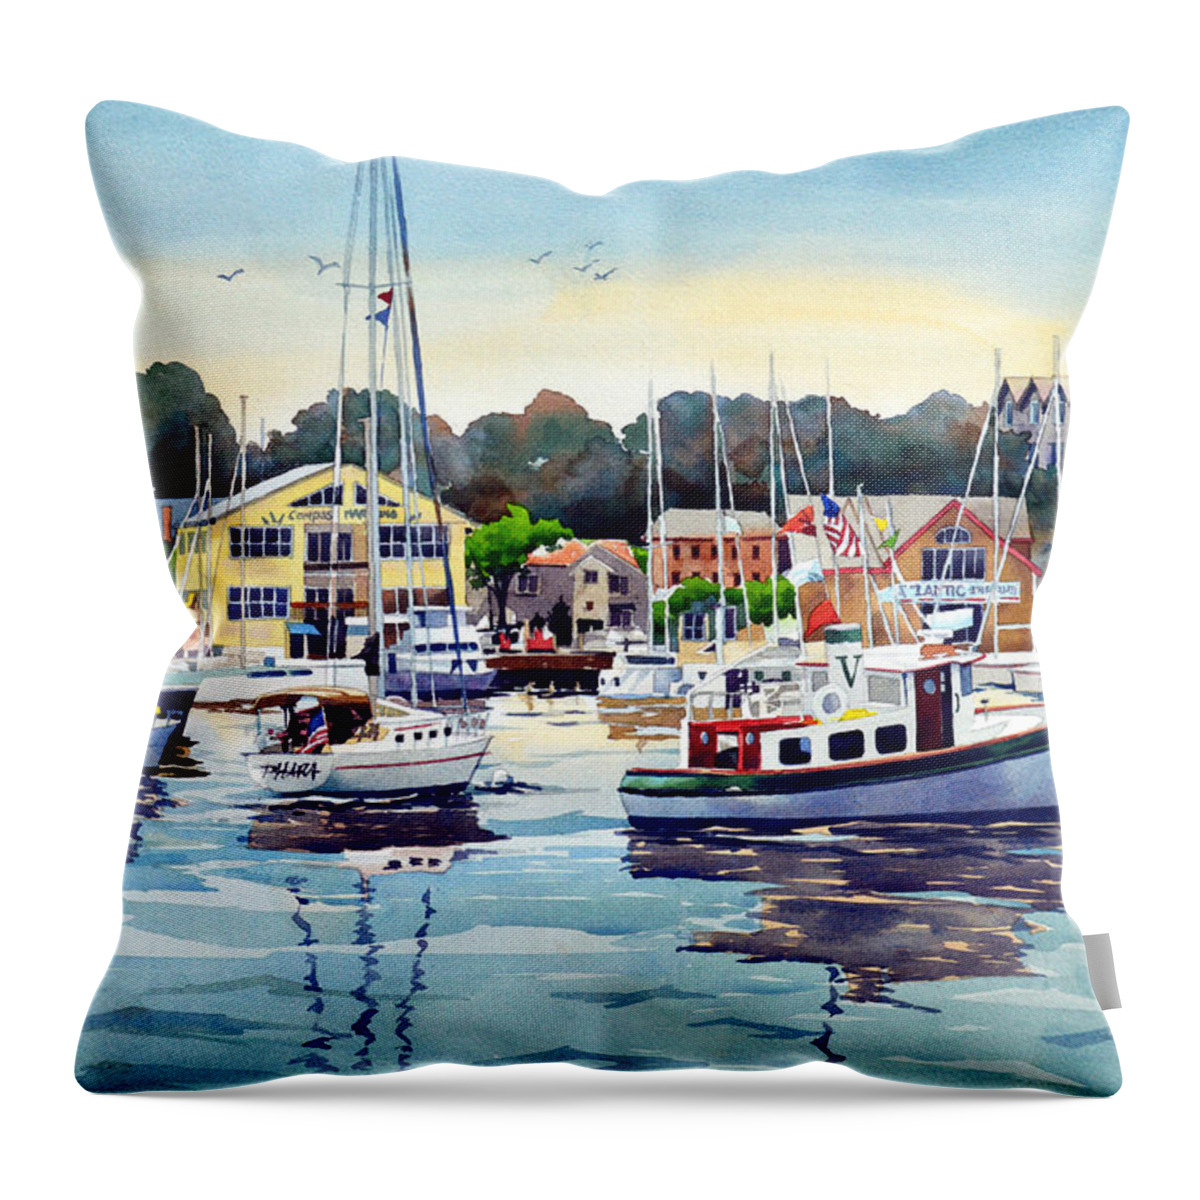 Watercolor Throw Pillow featuring the painting Eastport Skyscrapers by Mick Williams